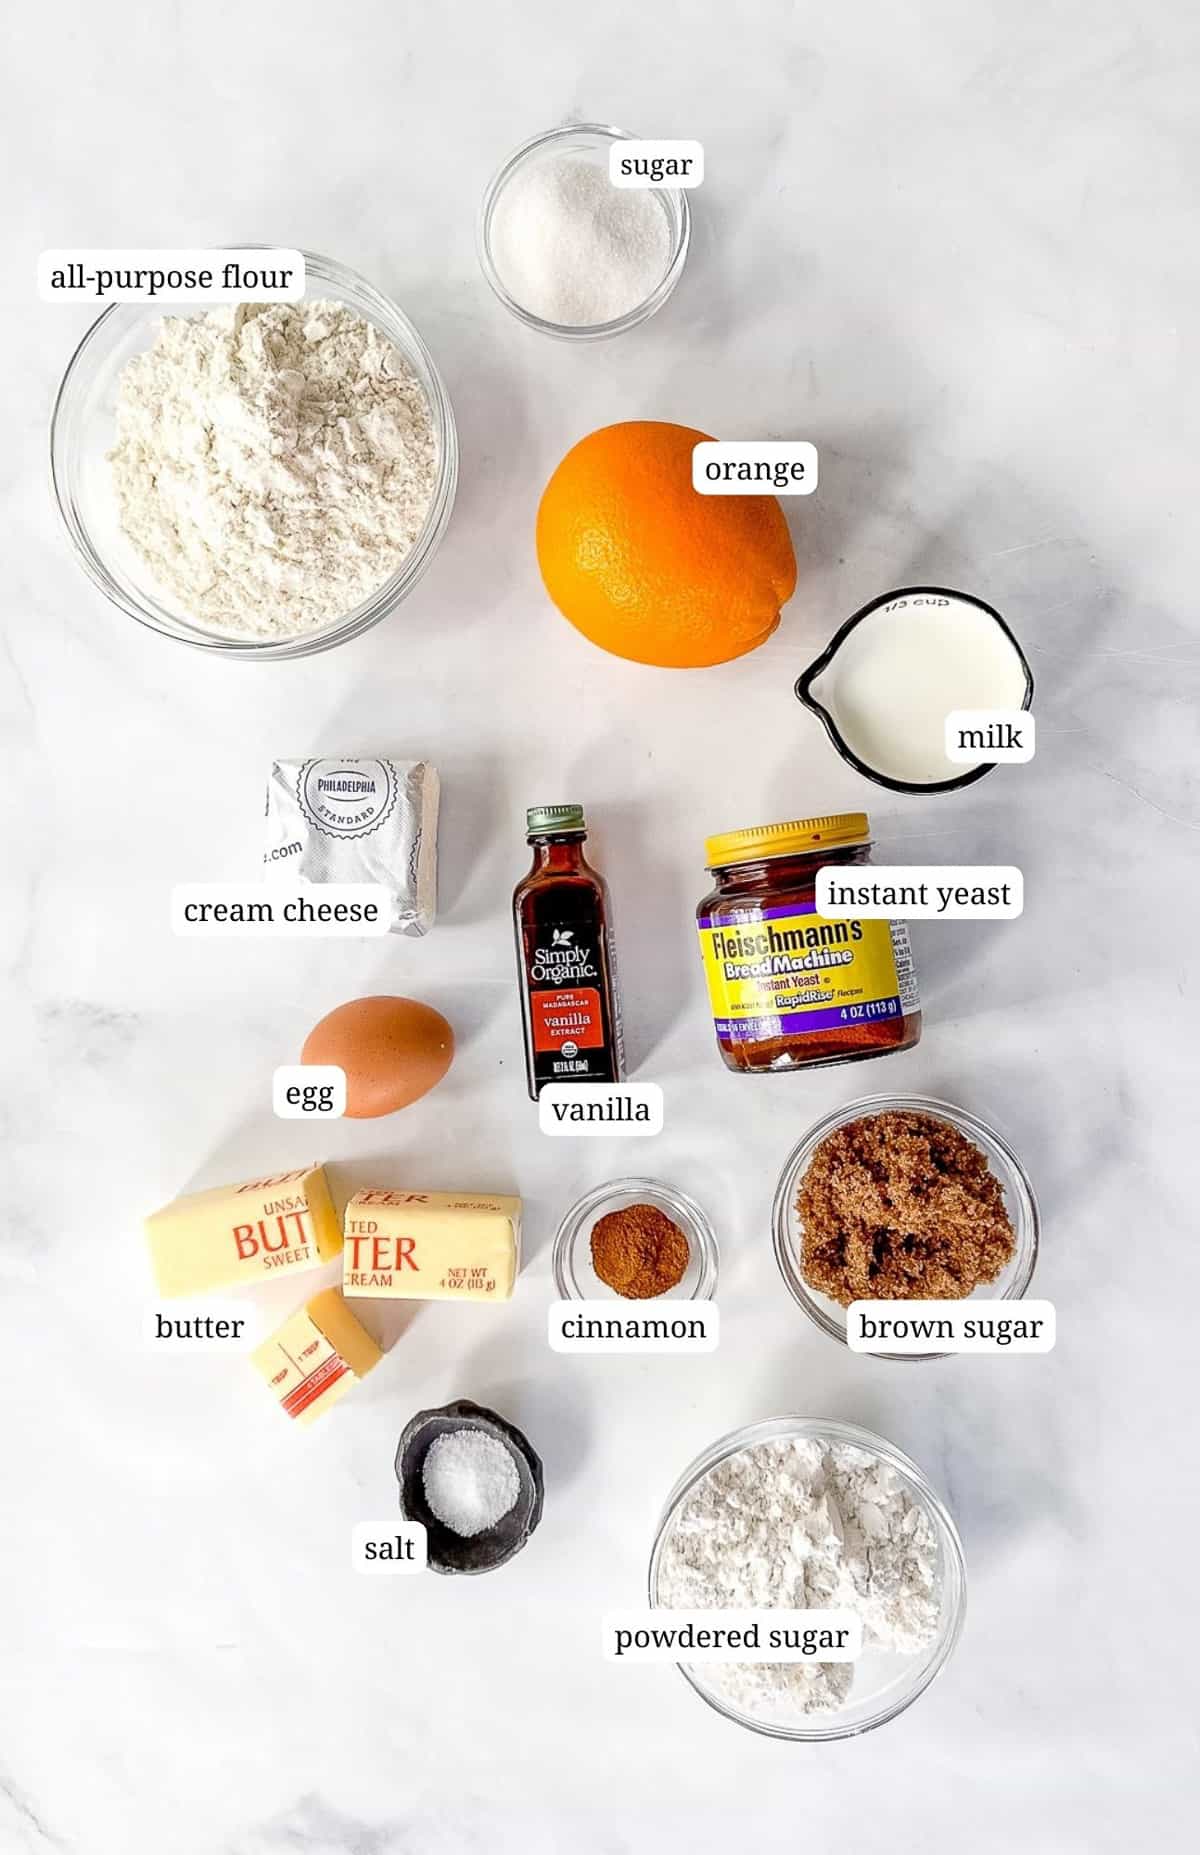 Labeled image of the ingredients needed to make blueberry orange cinnamon rolls.